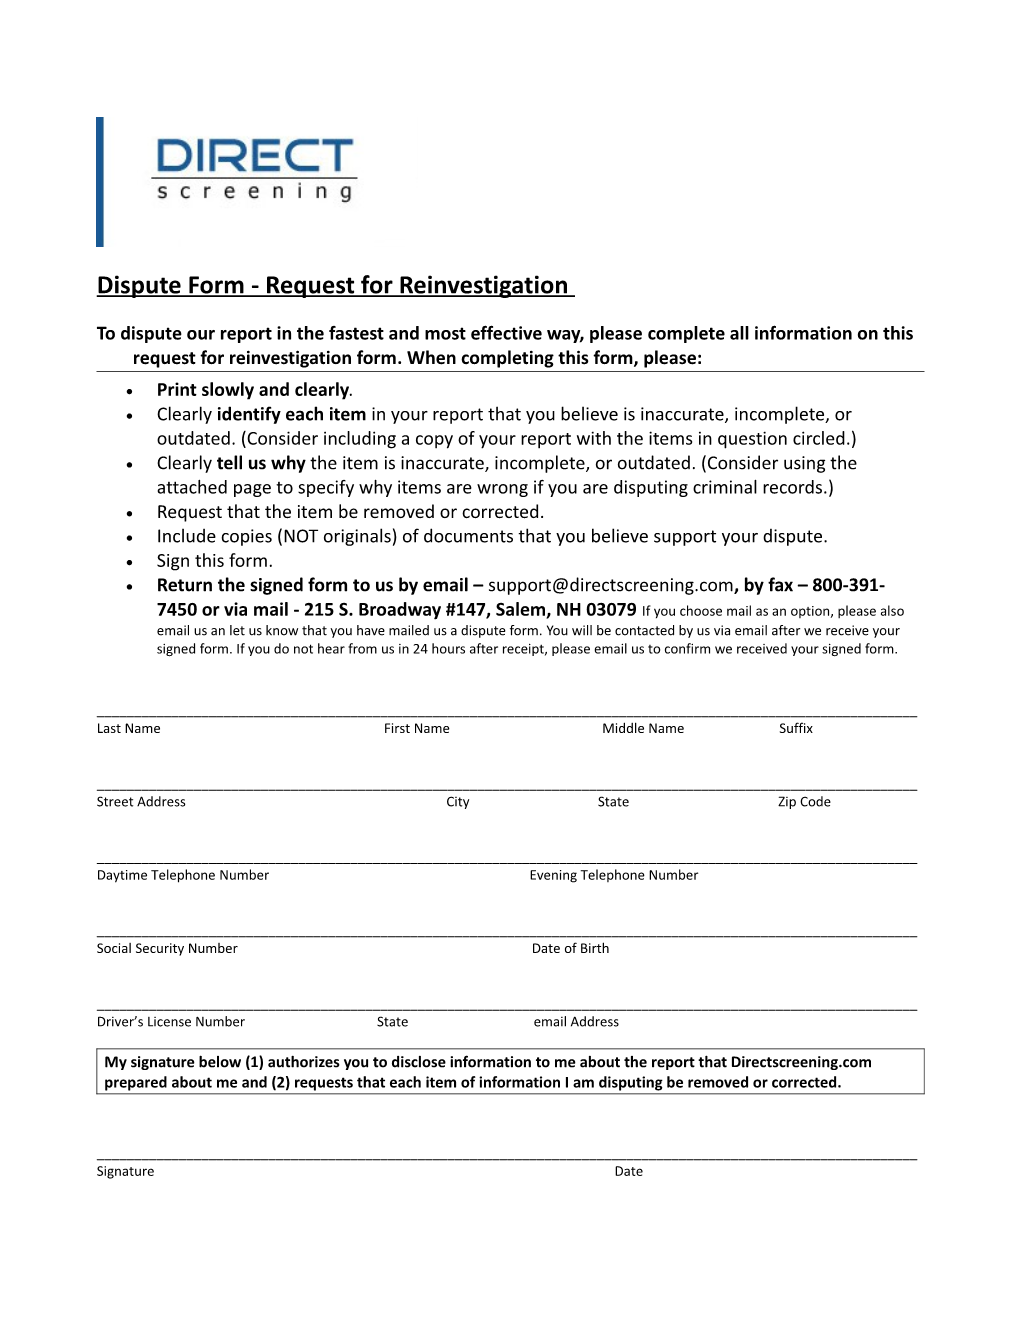 Dispute Form - Request for Reinvestigation